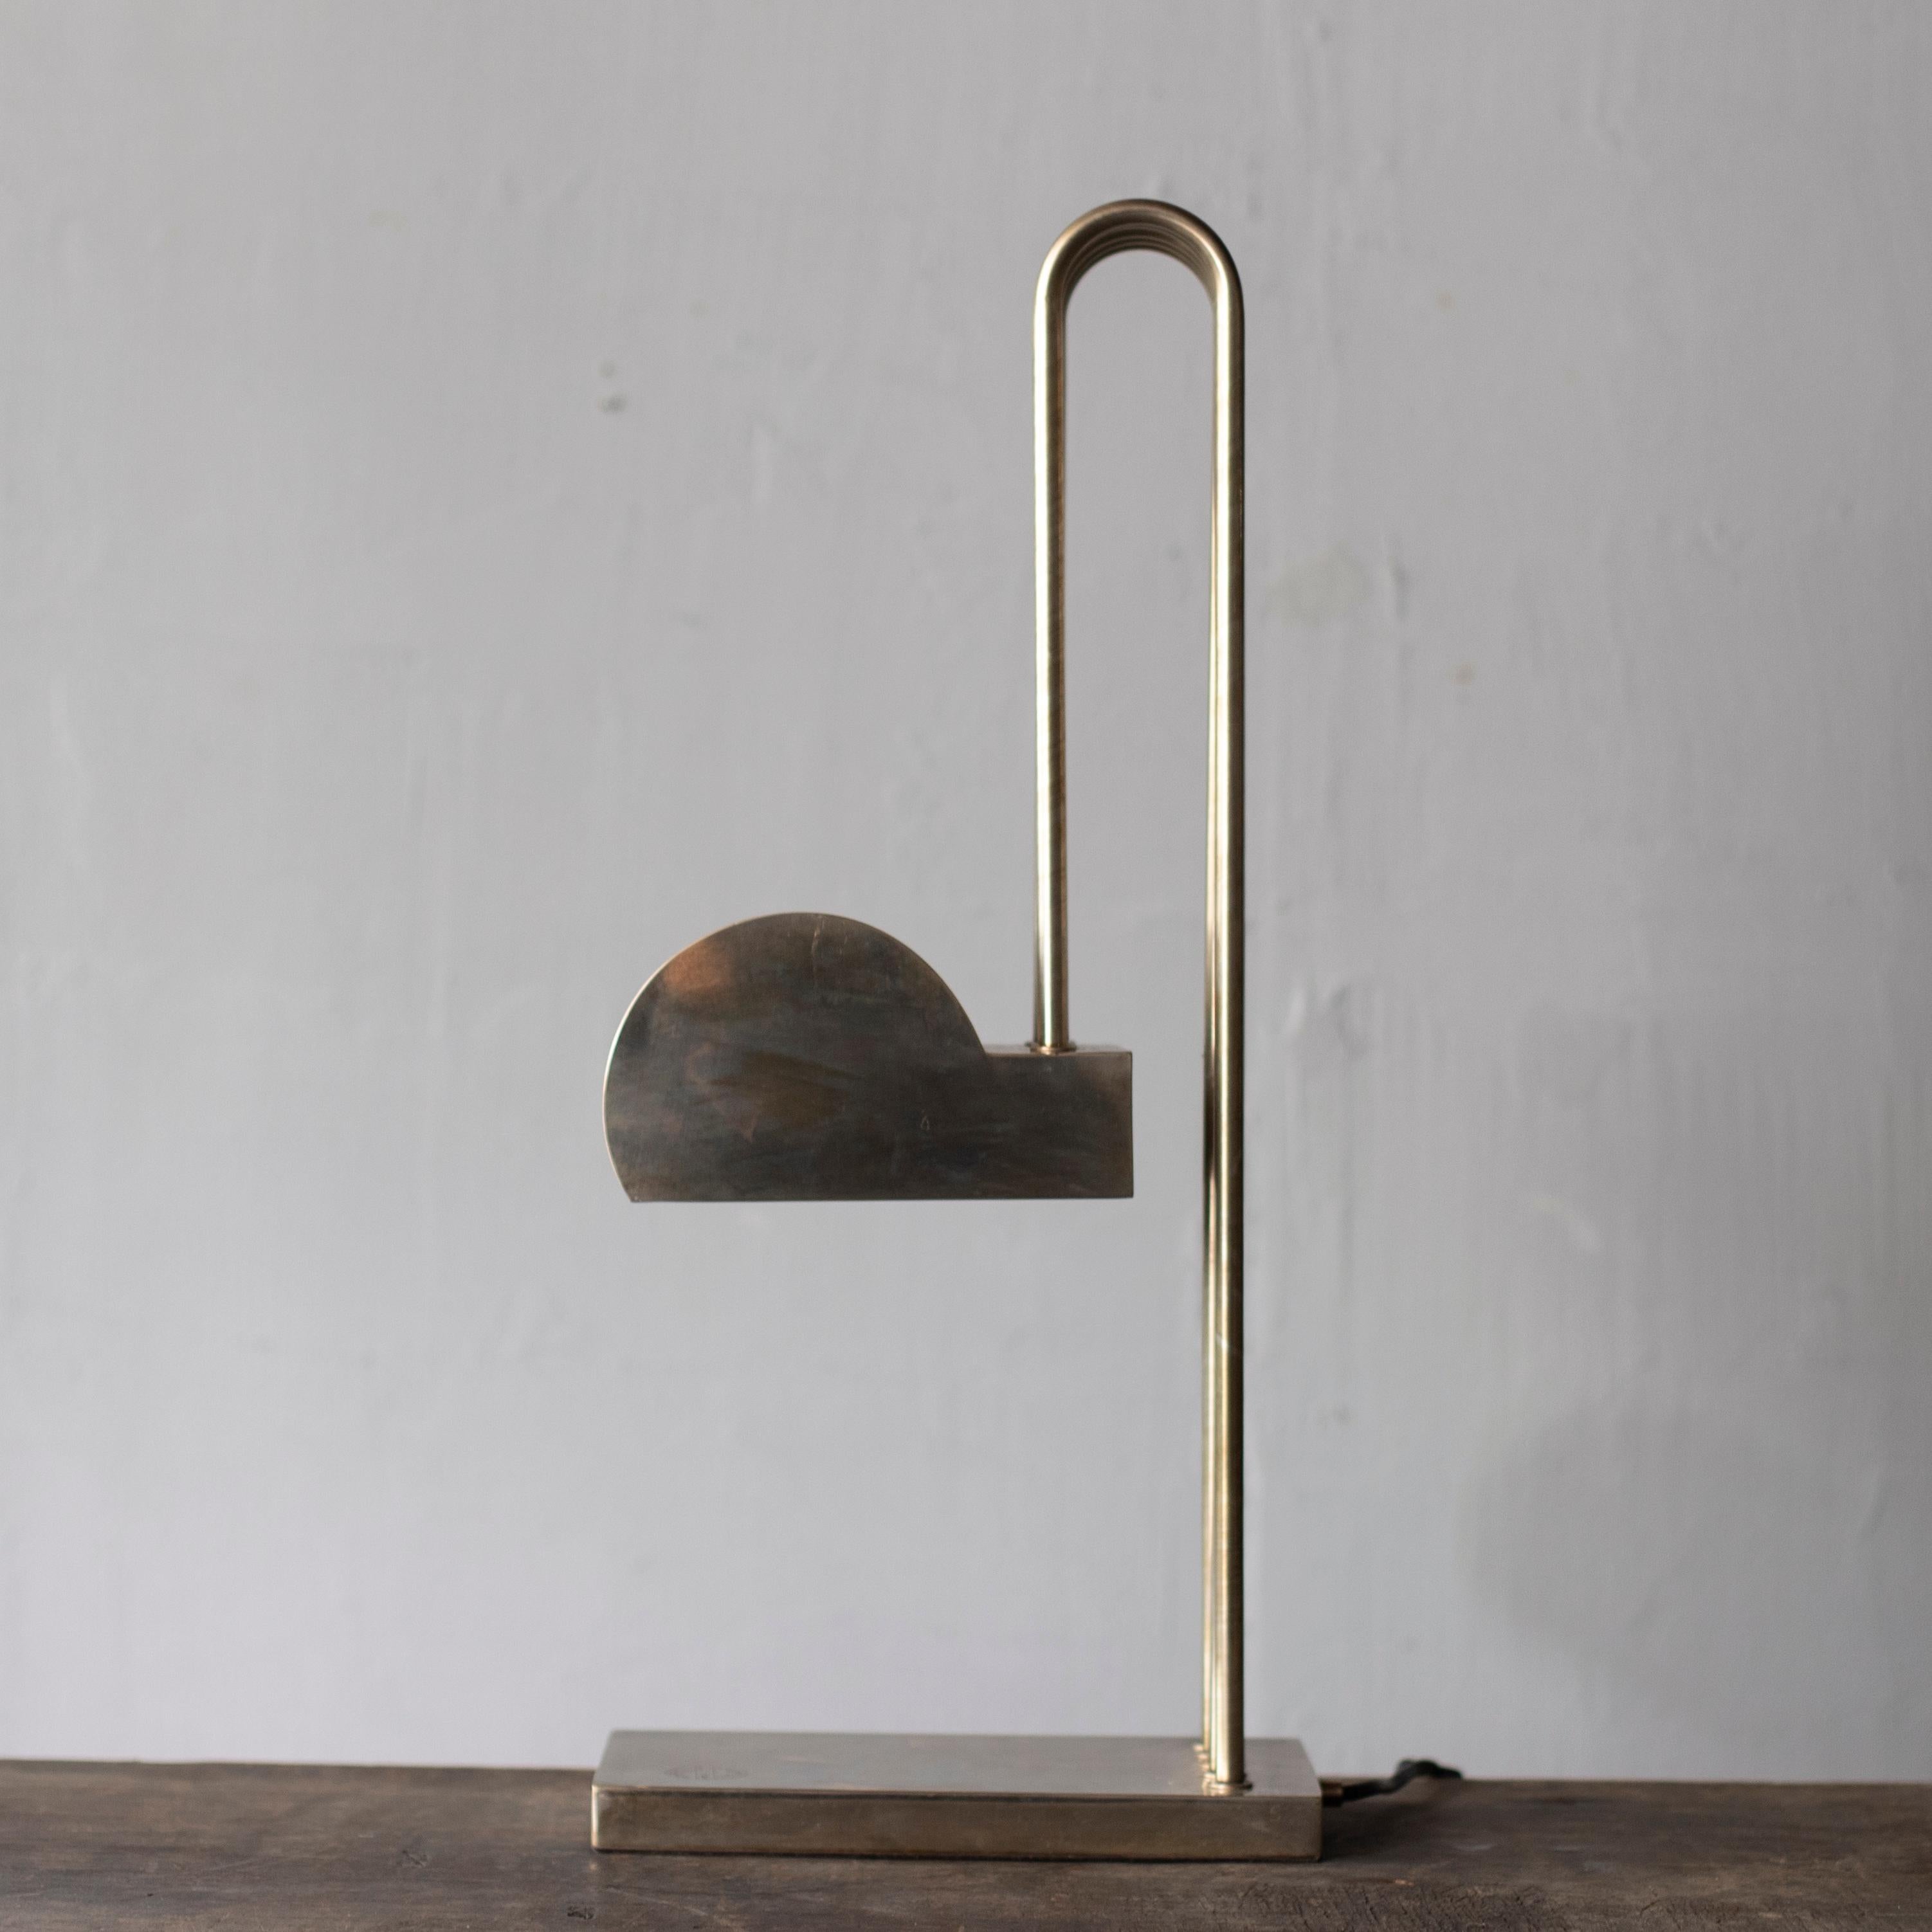 This very beautiful Art Deco desk lamp was designed by Marcel Breuer for the International Exposition of Modern Industrial and Decorative Arts in Paris. E14 socket.